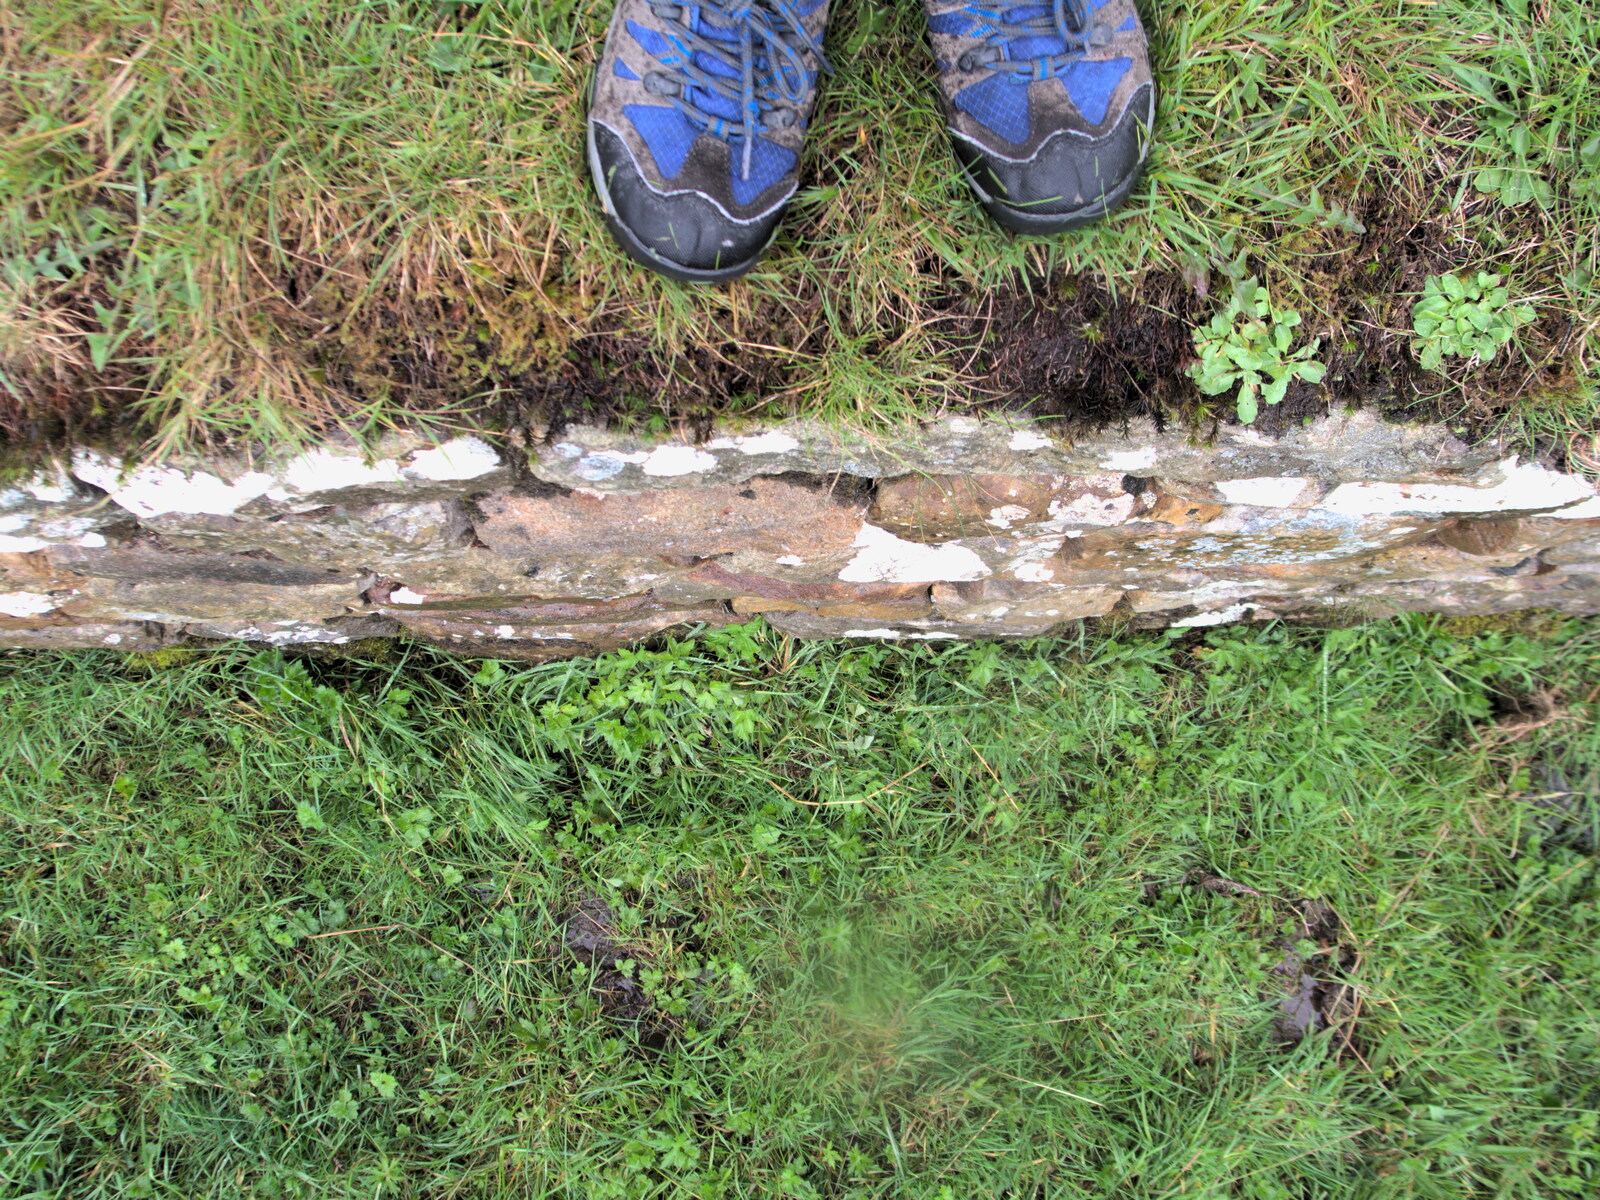 Fred's feet on top of the Ha-ha wall from Florence Court and a Postcard from Sligo, Fermanagh and Sligo, Ireland - 21st August 2019